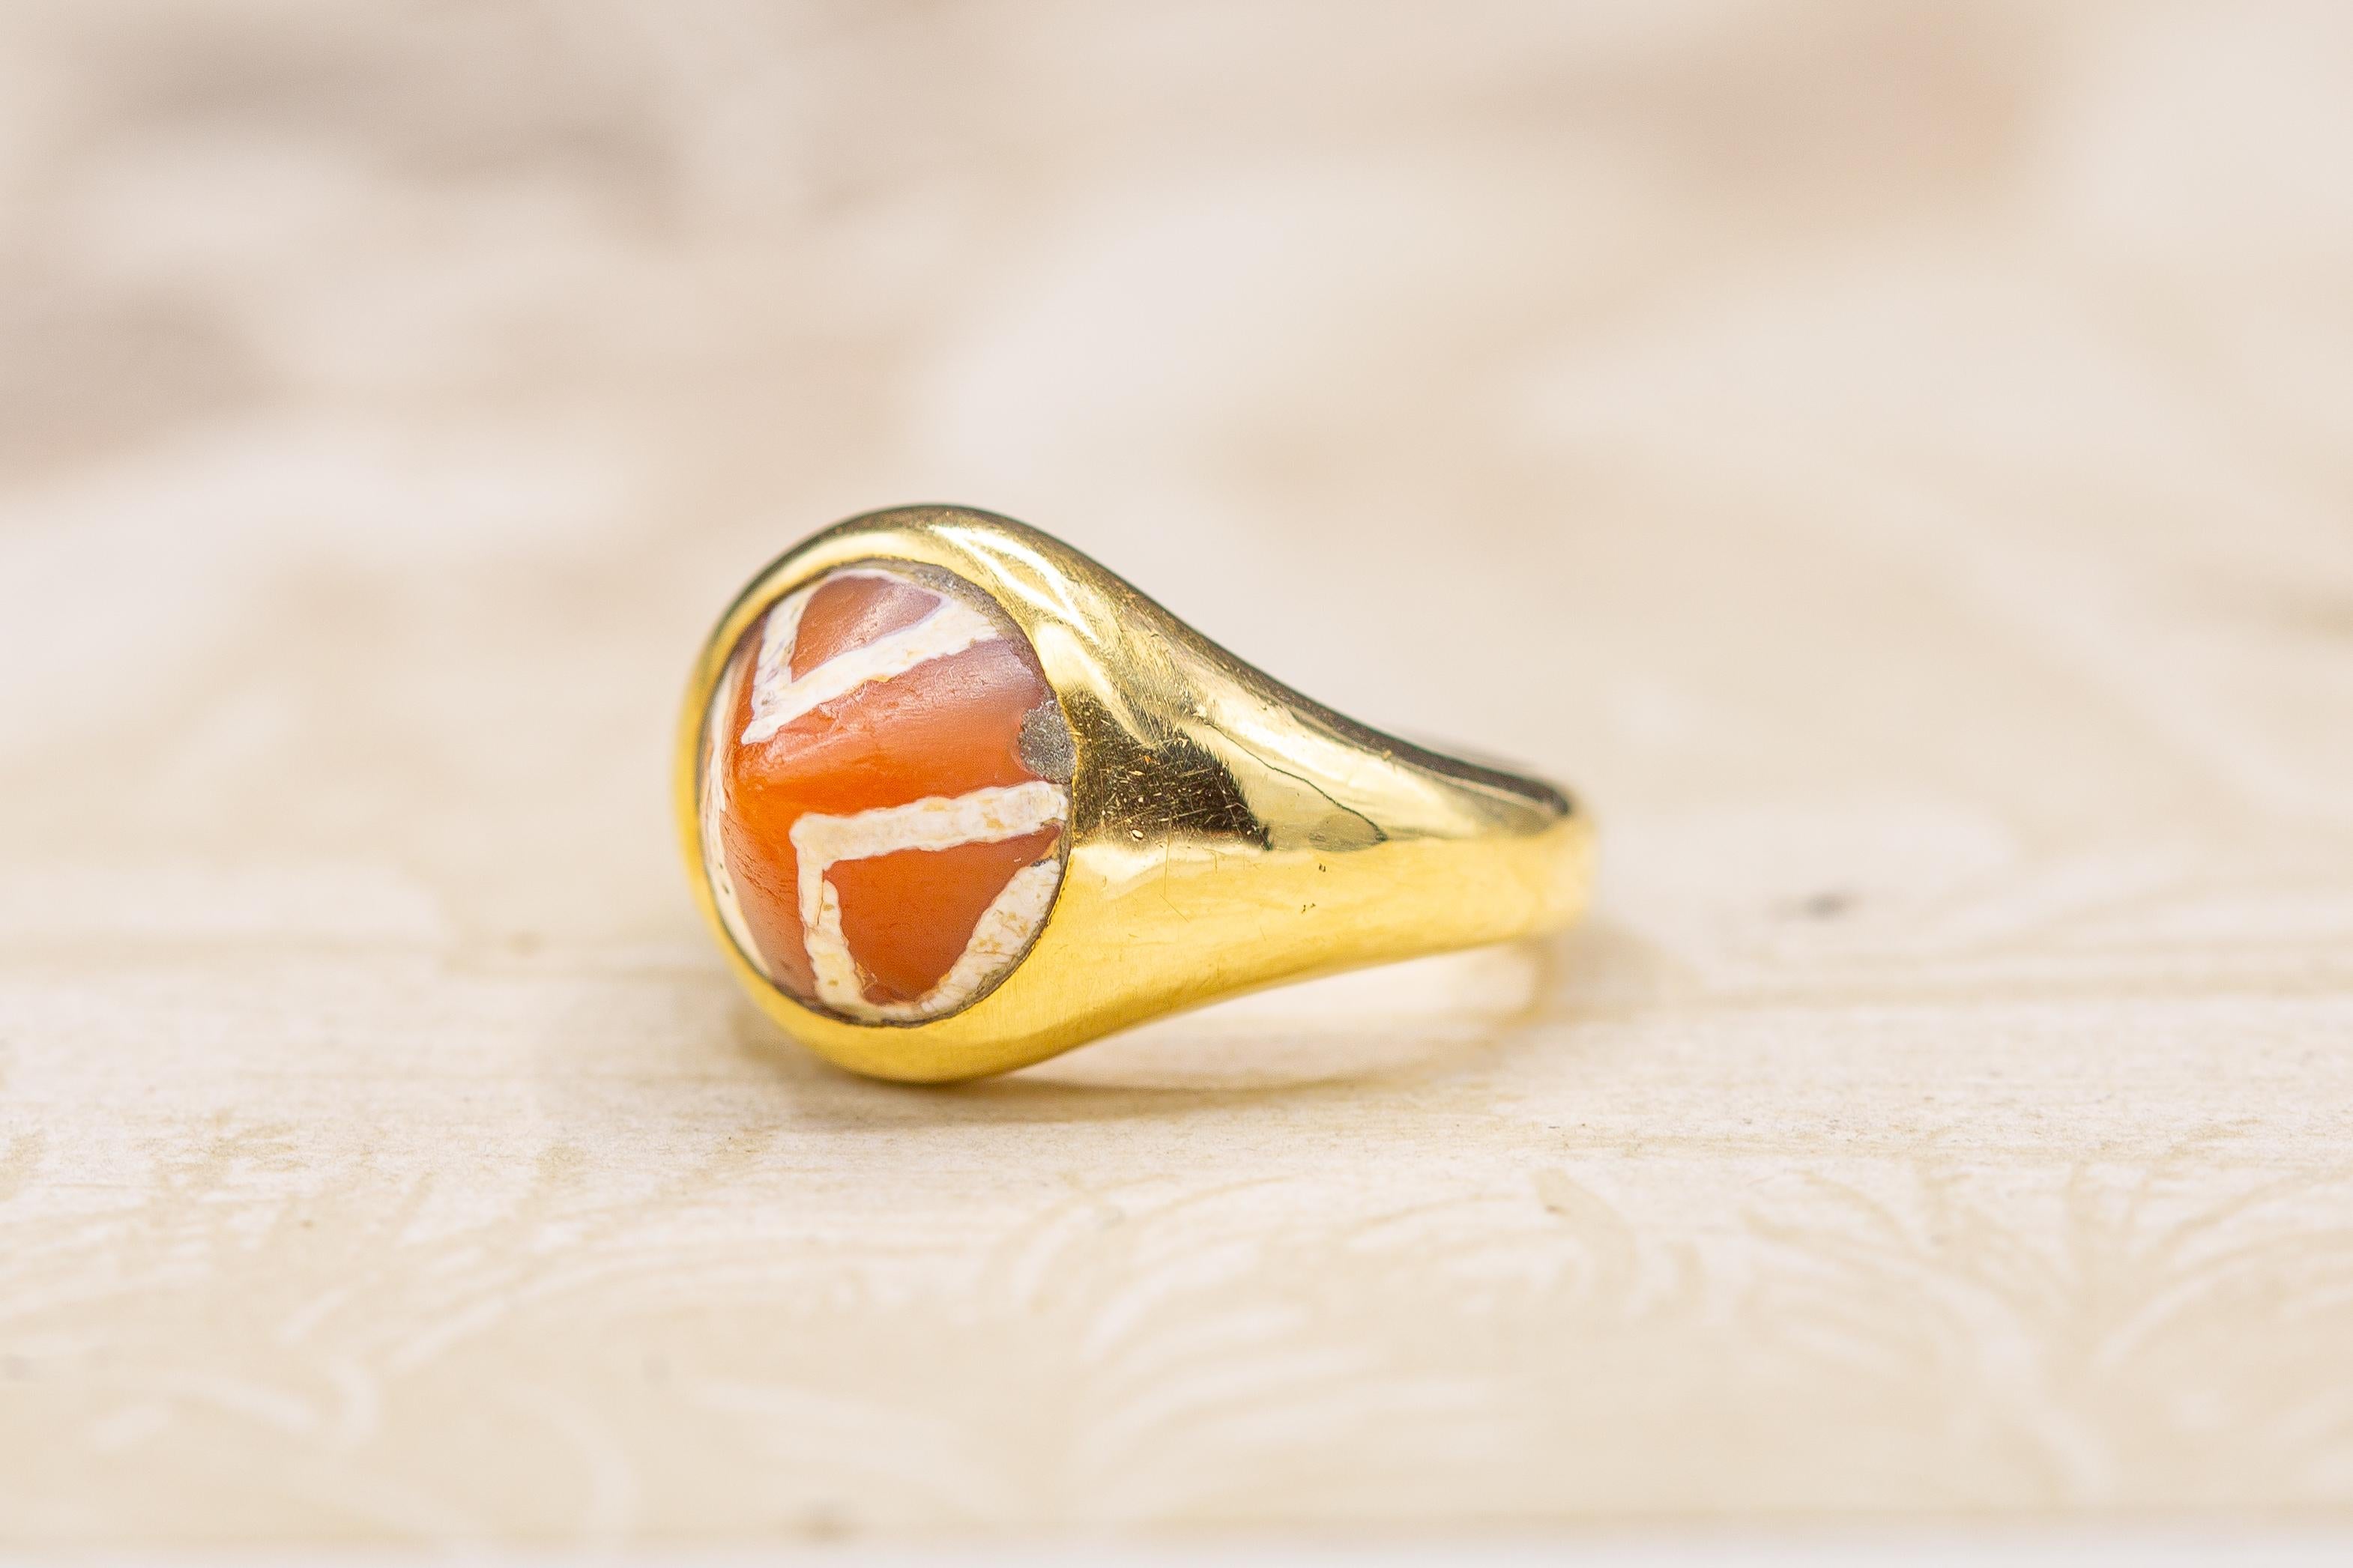 A superb and rare ancient Indus Valley etched carnelian bead ring. The conical shaped carnelian gemstone in the centre dates from the middle of the third millennium BC. Deep orange in colour with white patterned etchings, these beads originate from